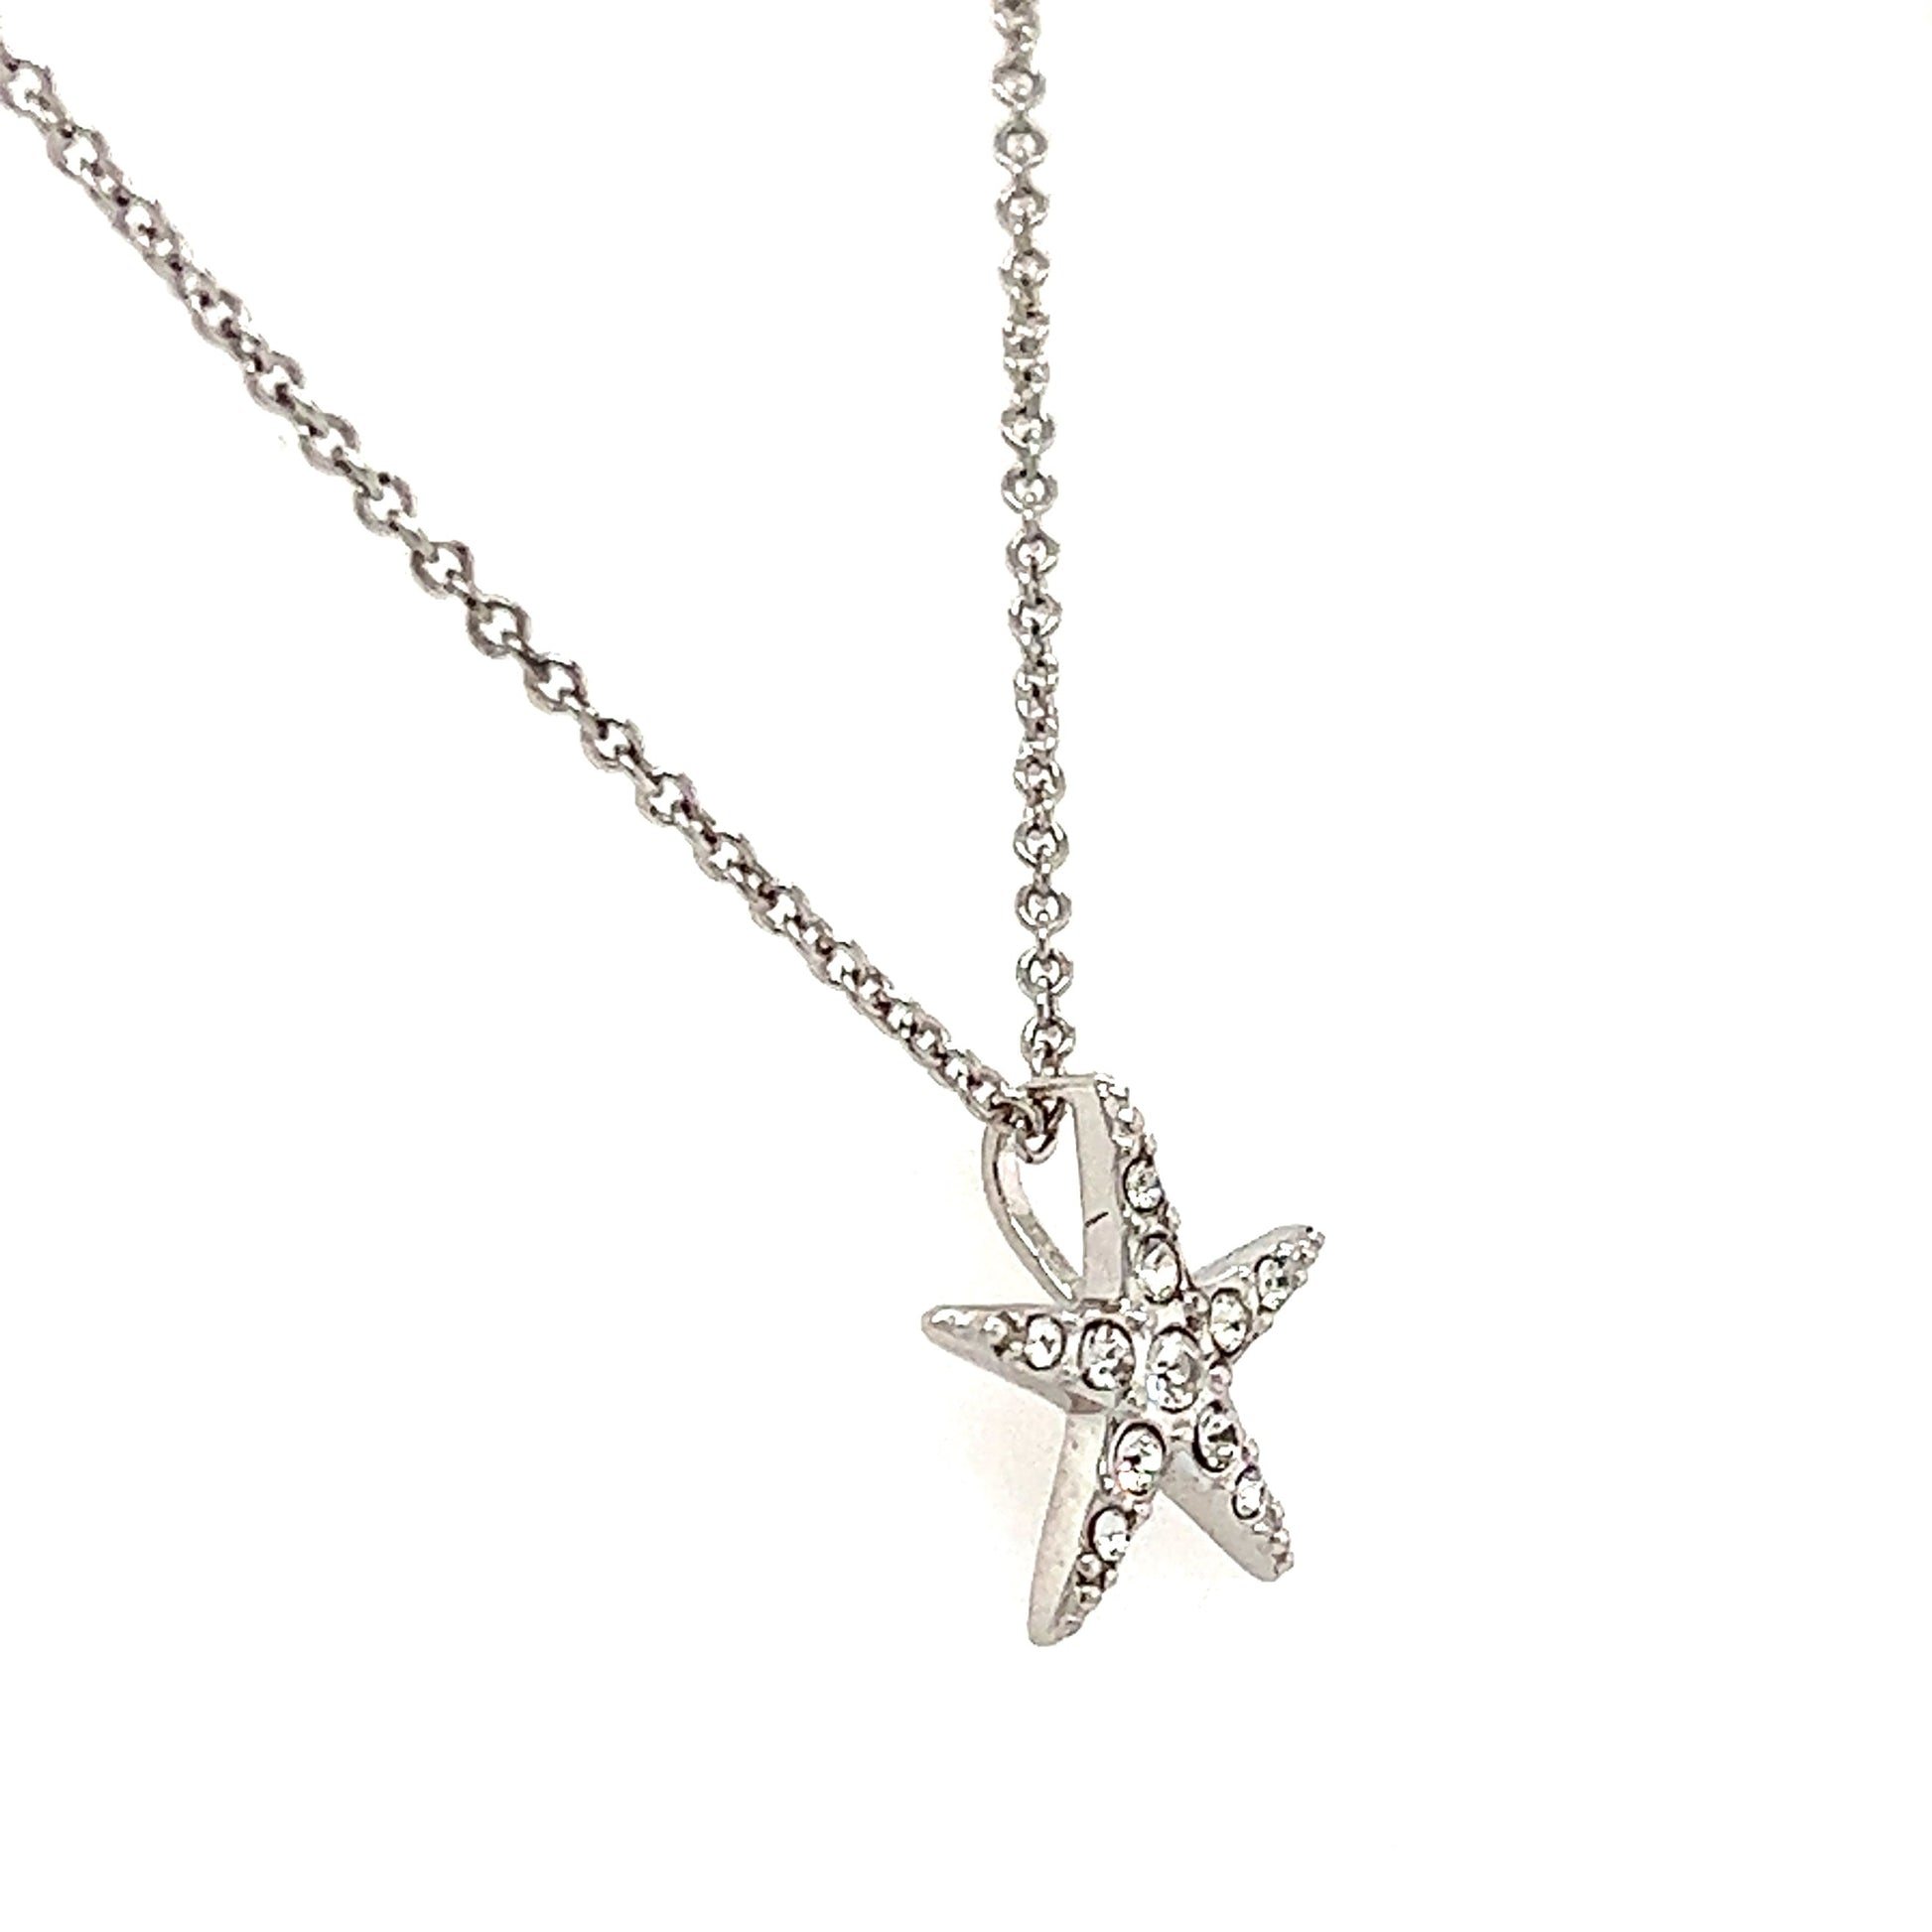 Small Starfish Necklace with White Crystals in Sterling Silver Right Side View